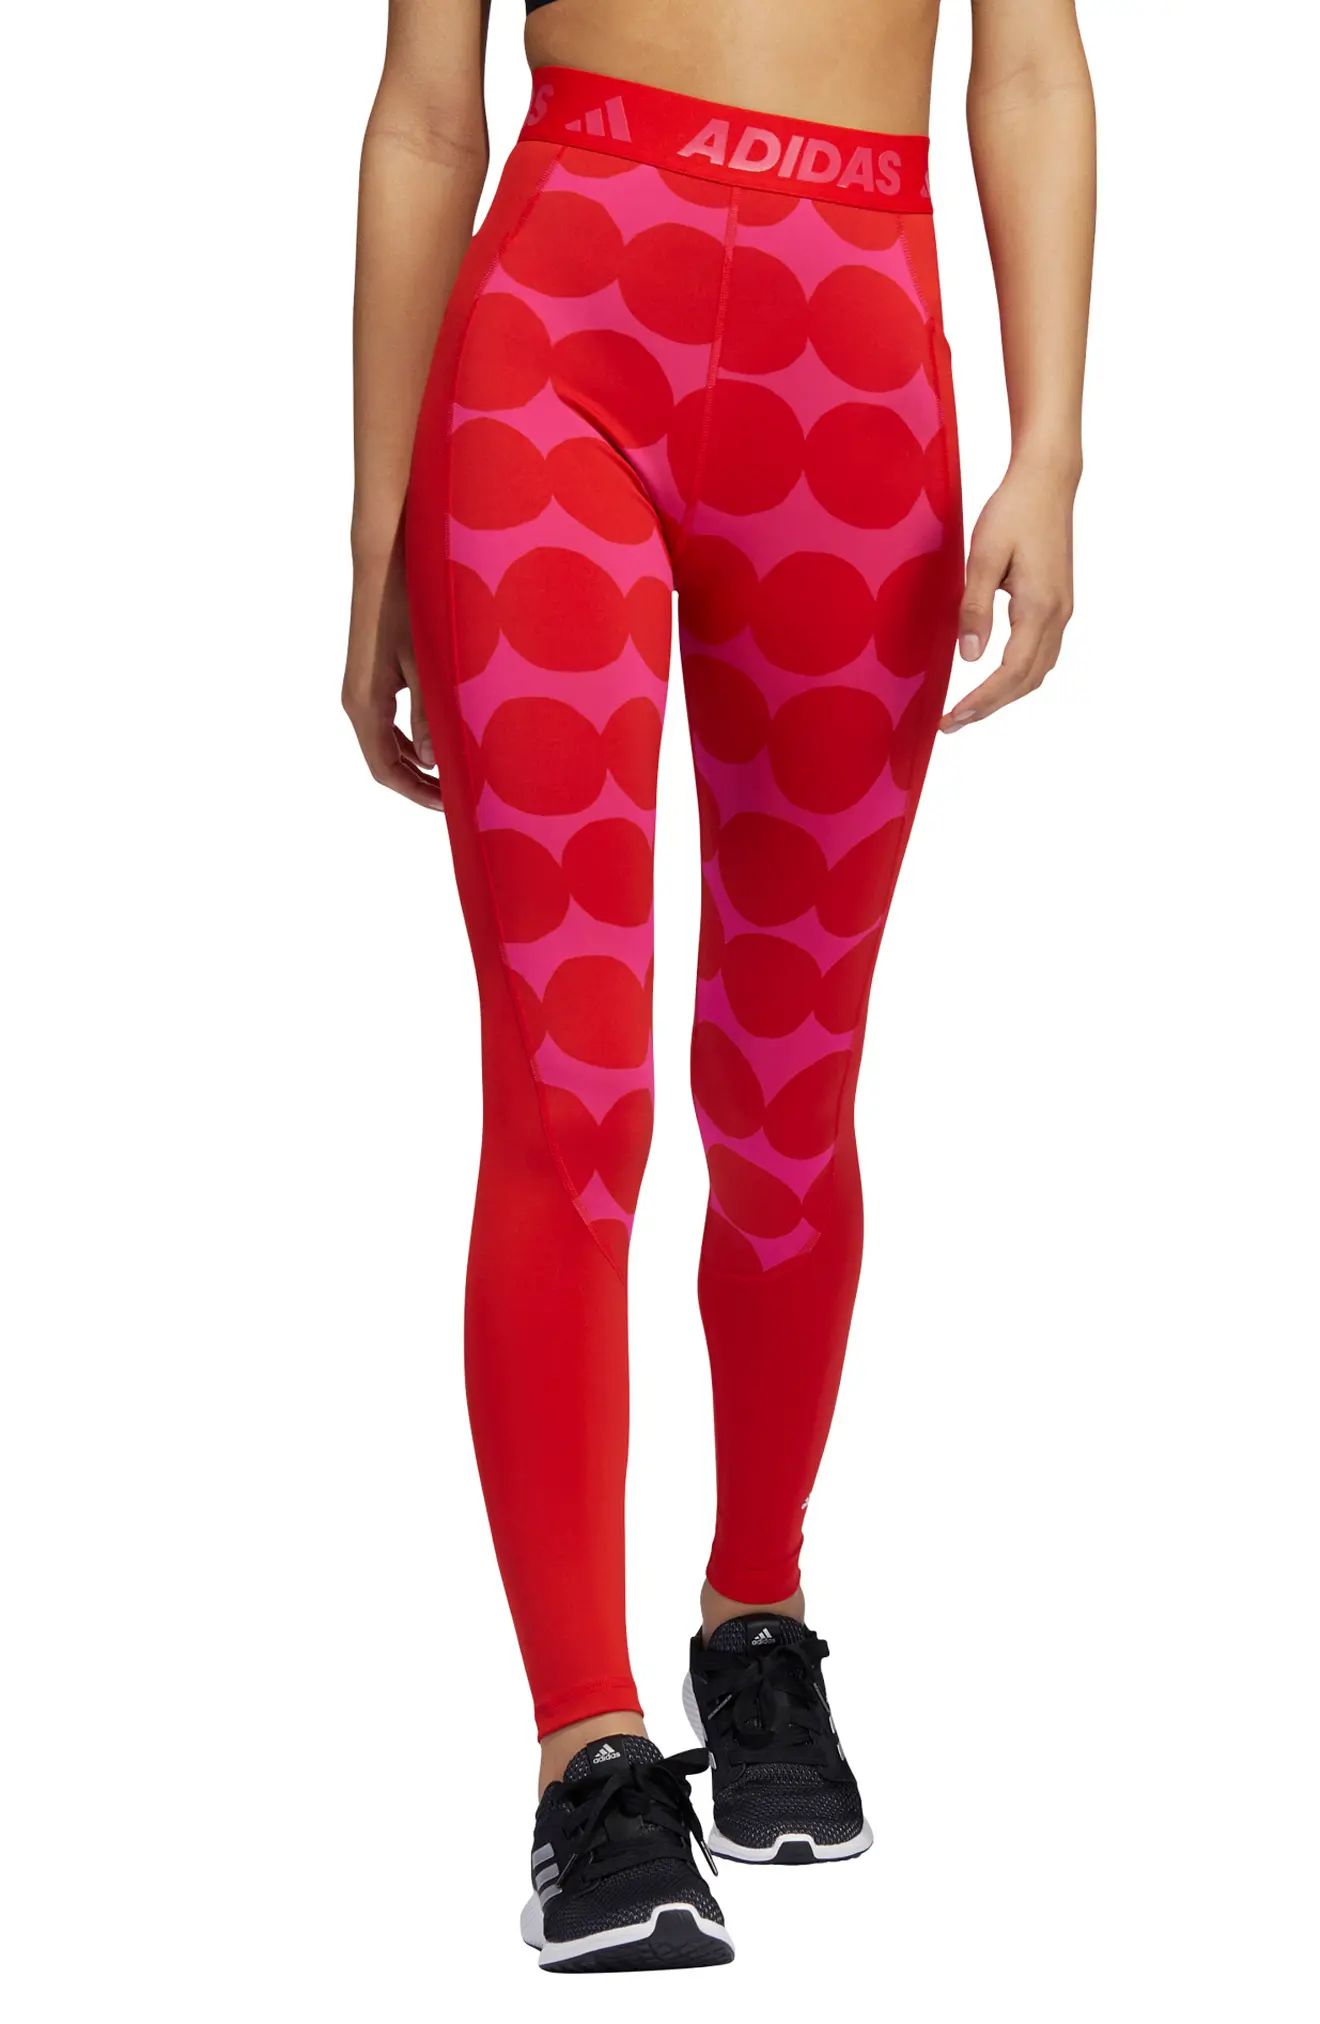 adidas x Marimekko Techfit Compression Training Tights, Size Large in Vivid Red at Nordstrom | Nordstrom